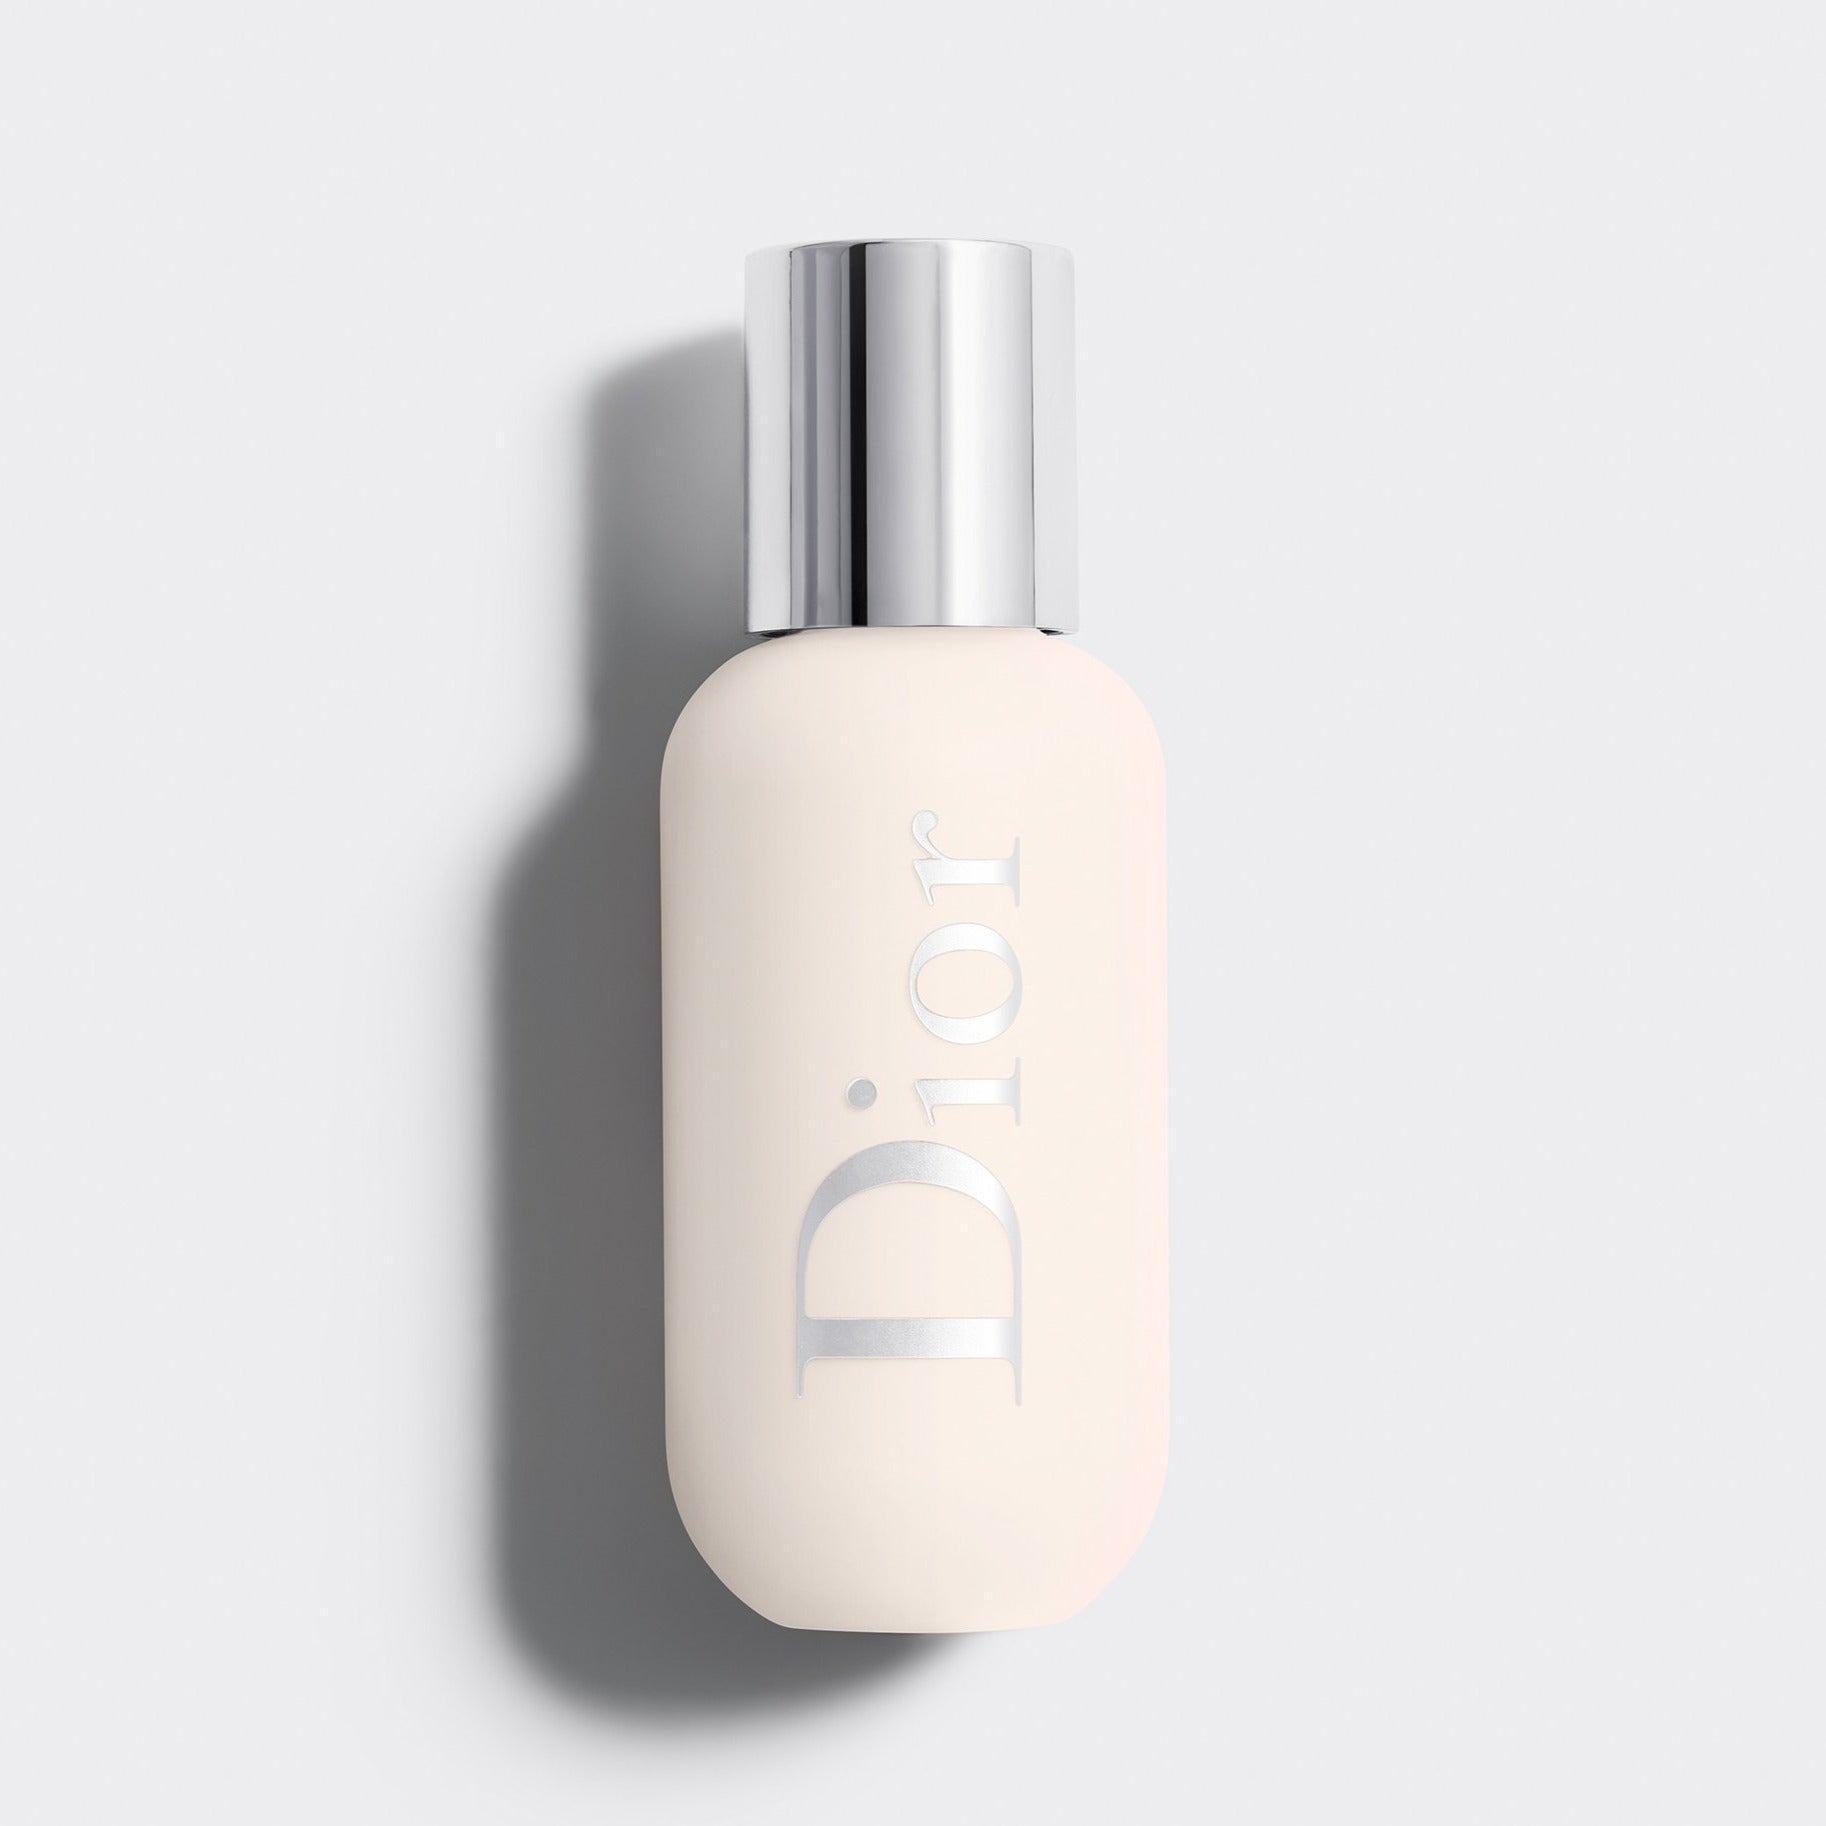 DIOR BACKSTAGE FACE & BODY PRIMER | Professional performance - instant radiant blurring & plumping effect - mattifying - 24h hydration*